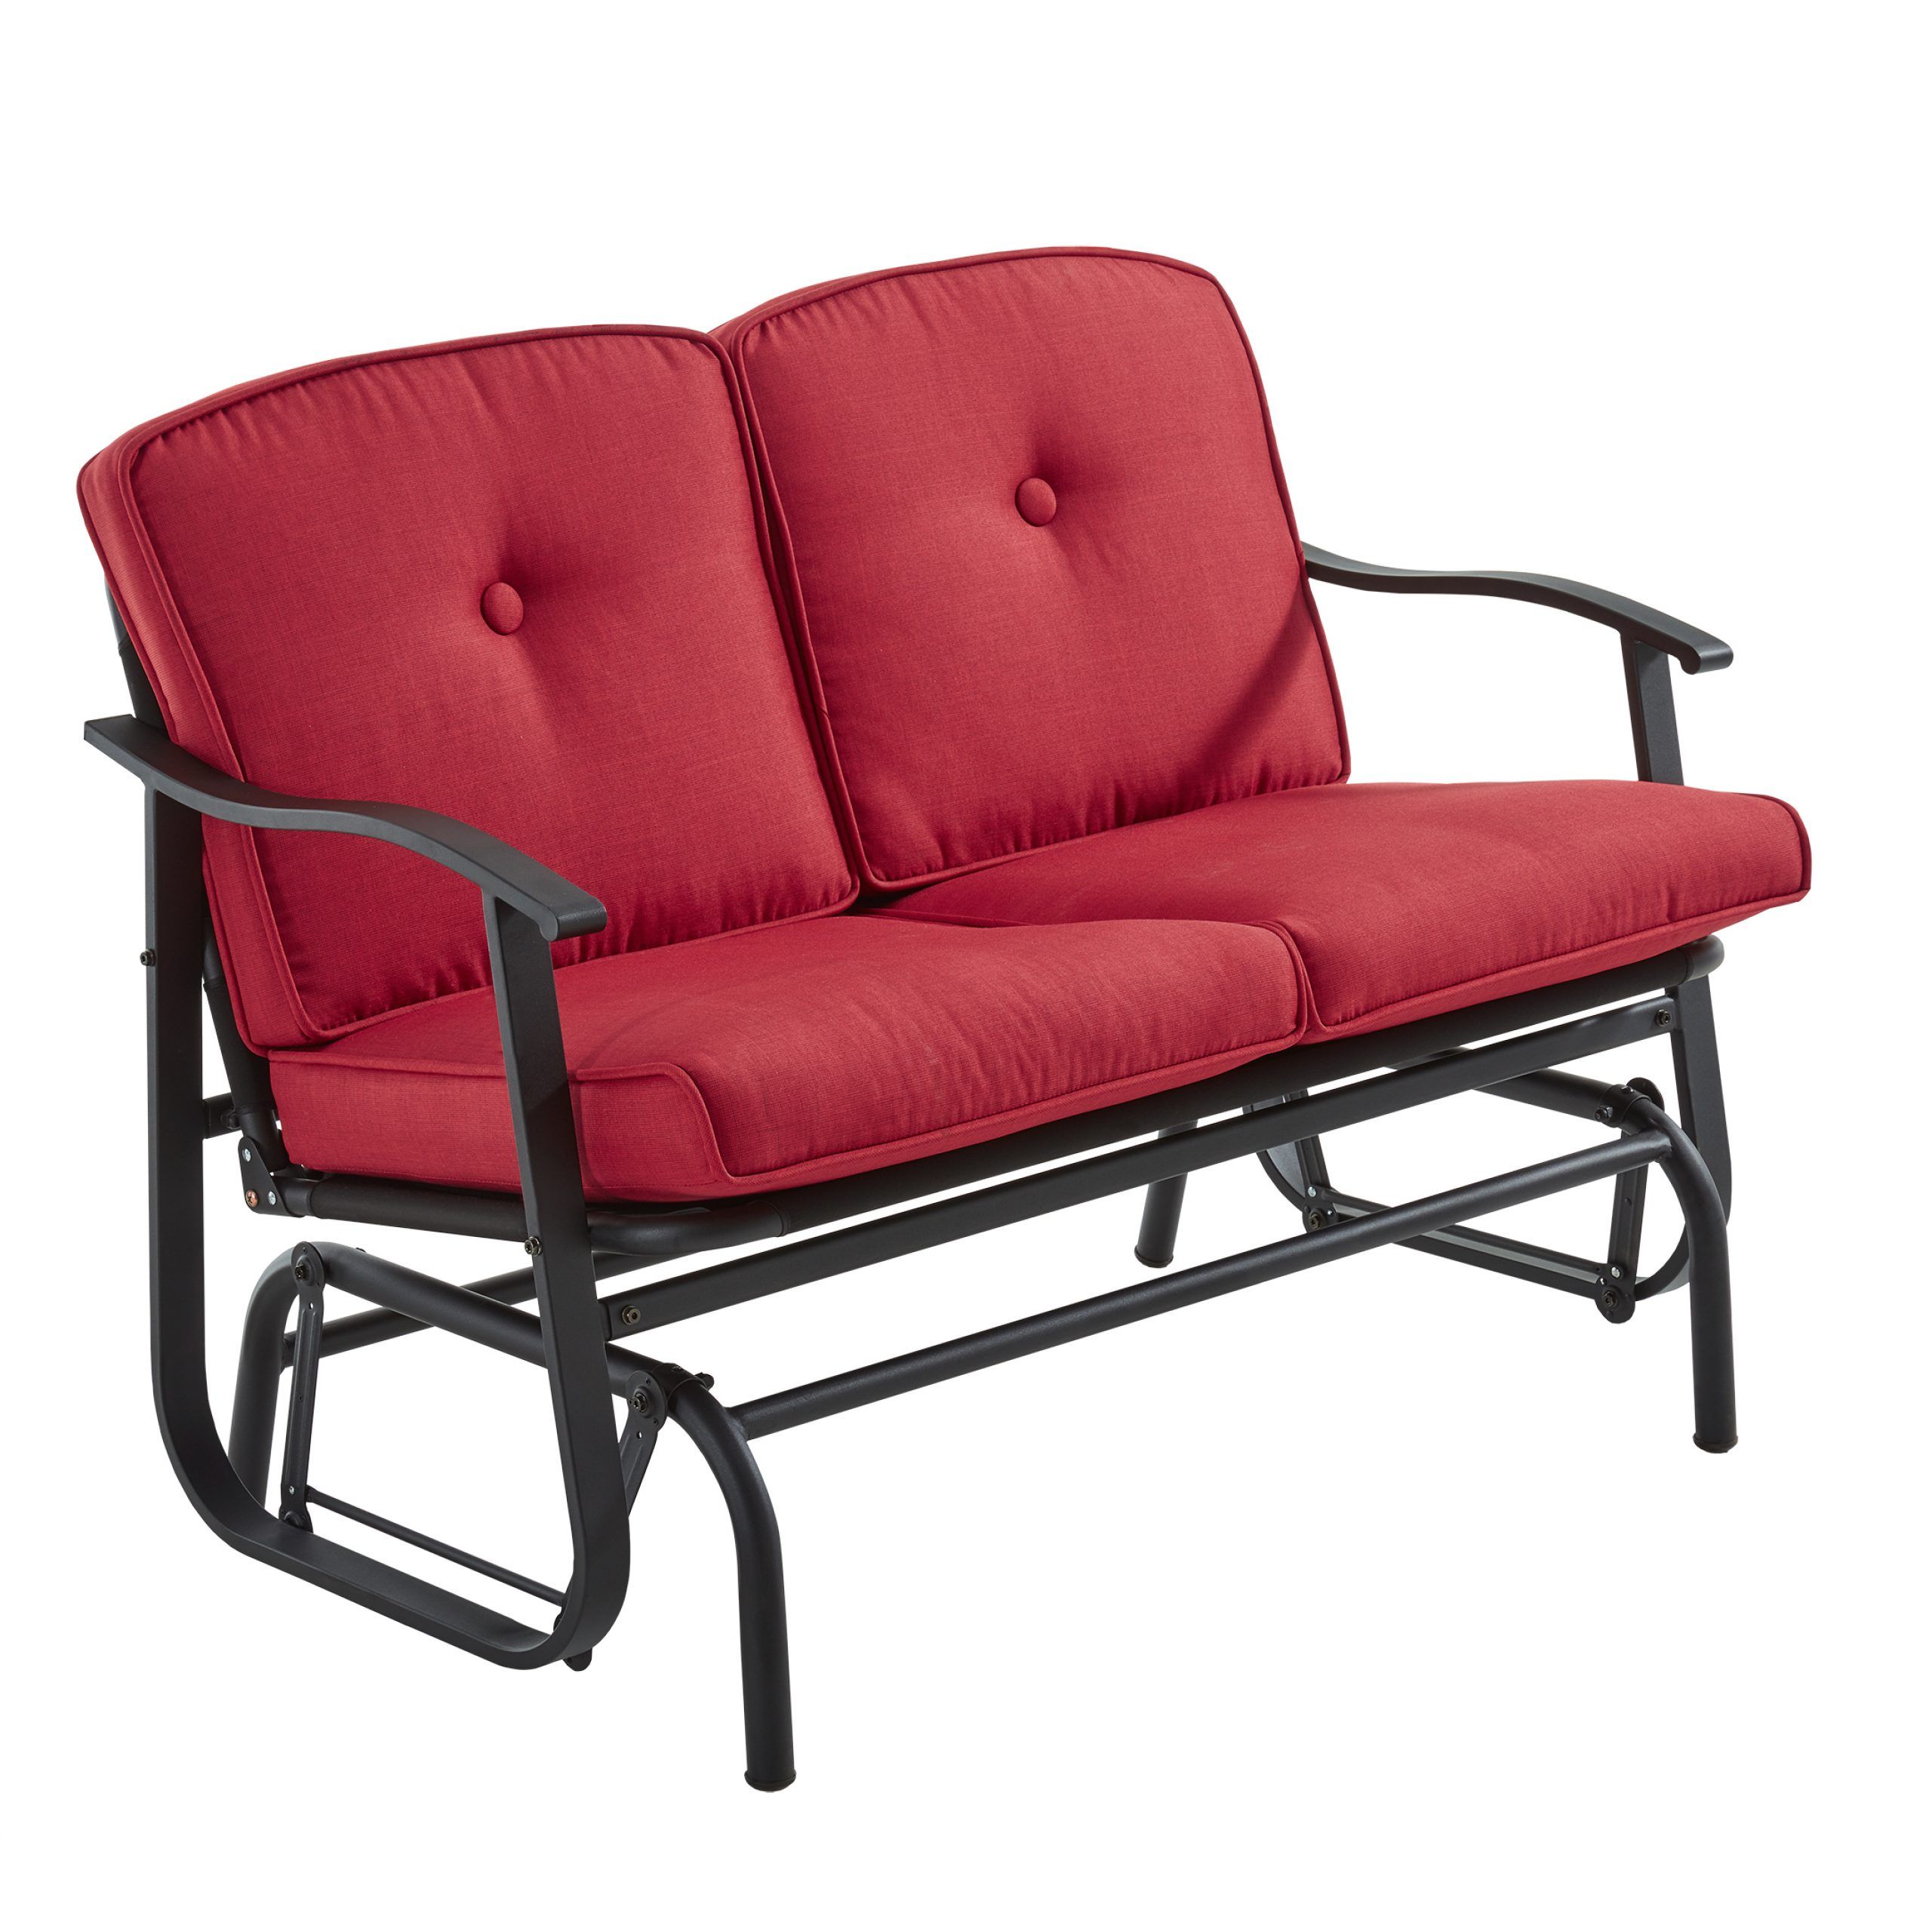 Outdoor Loveseat Gliders With Cushion Throughout 2019 Mainstays Belden Park Outdoor Loveseat Glider With Cushion (View 7 of 30)